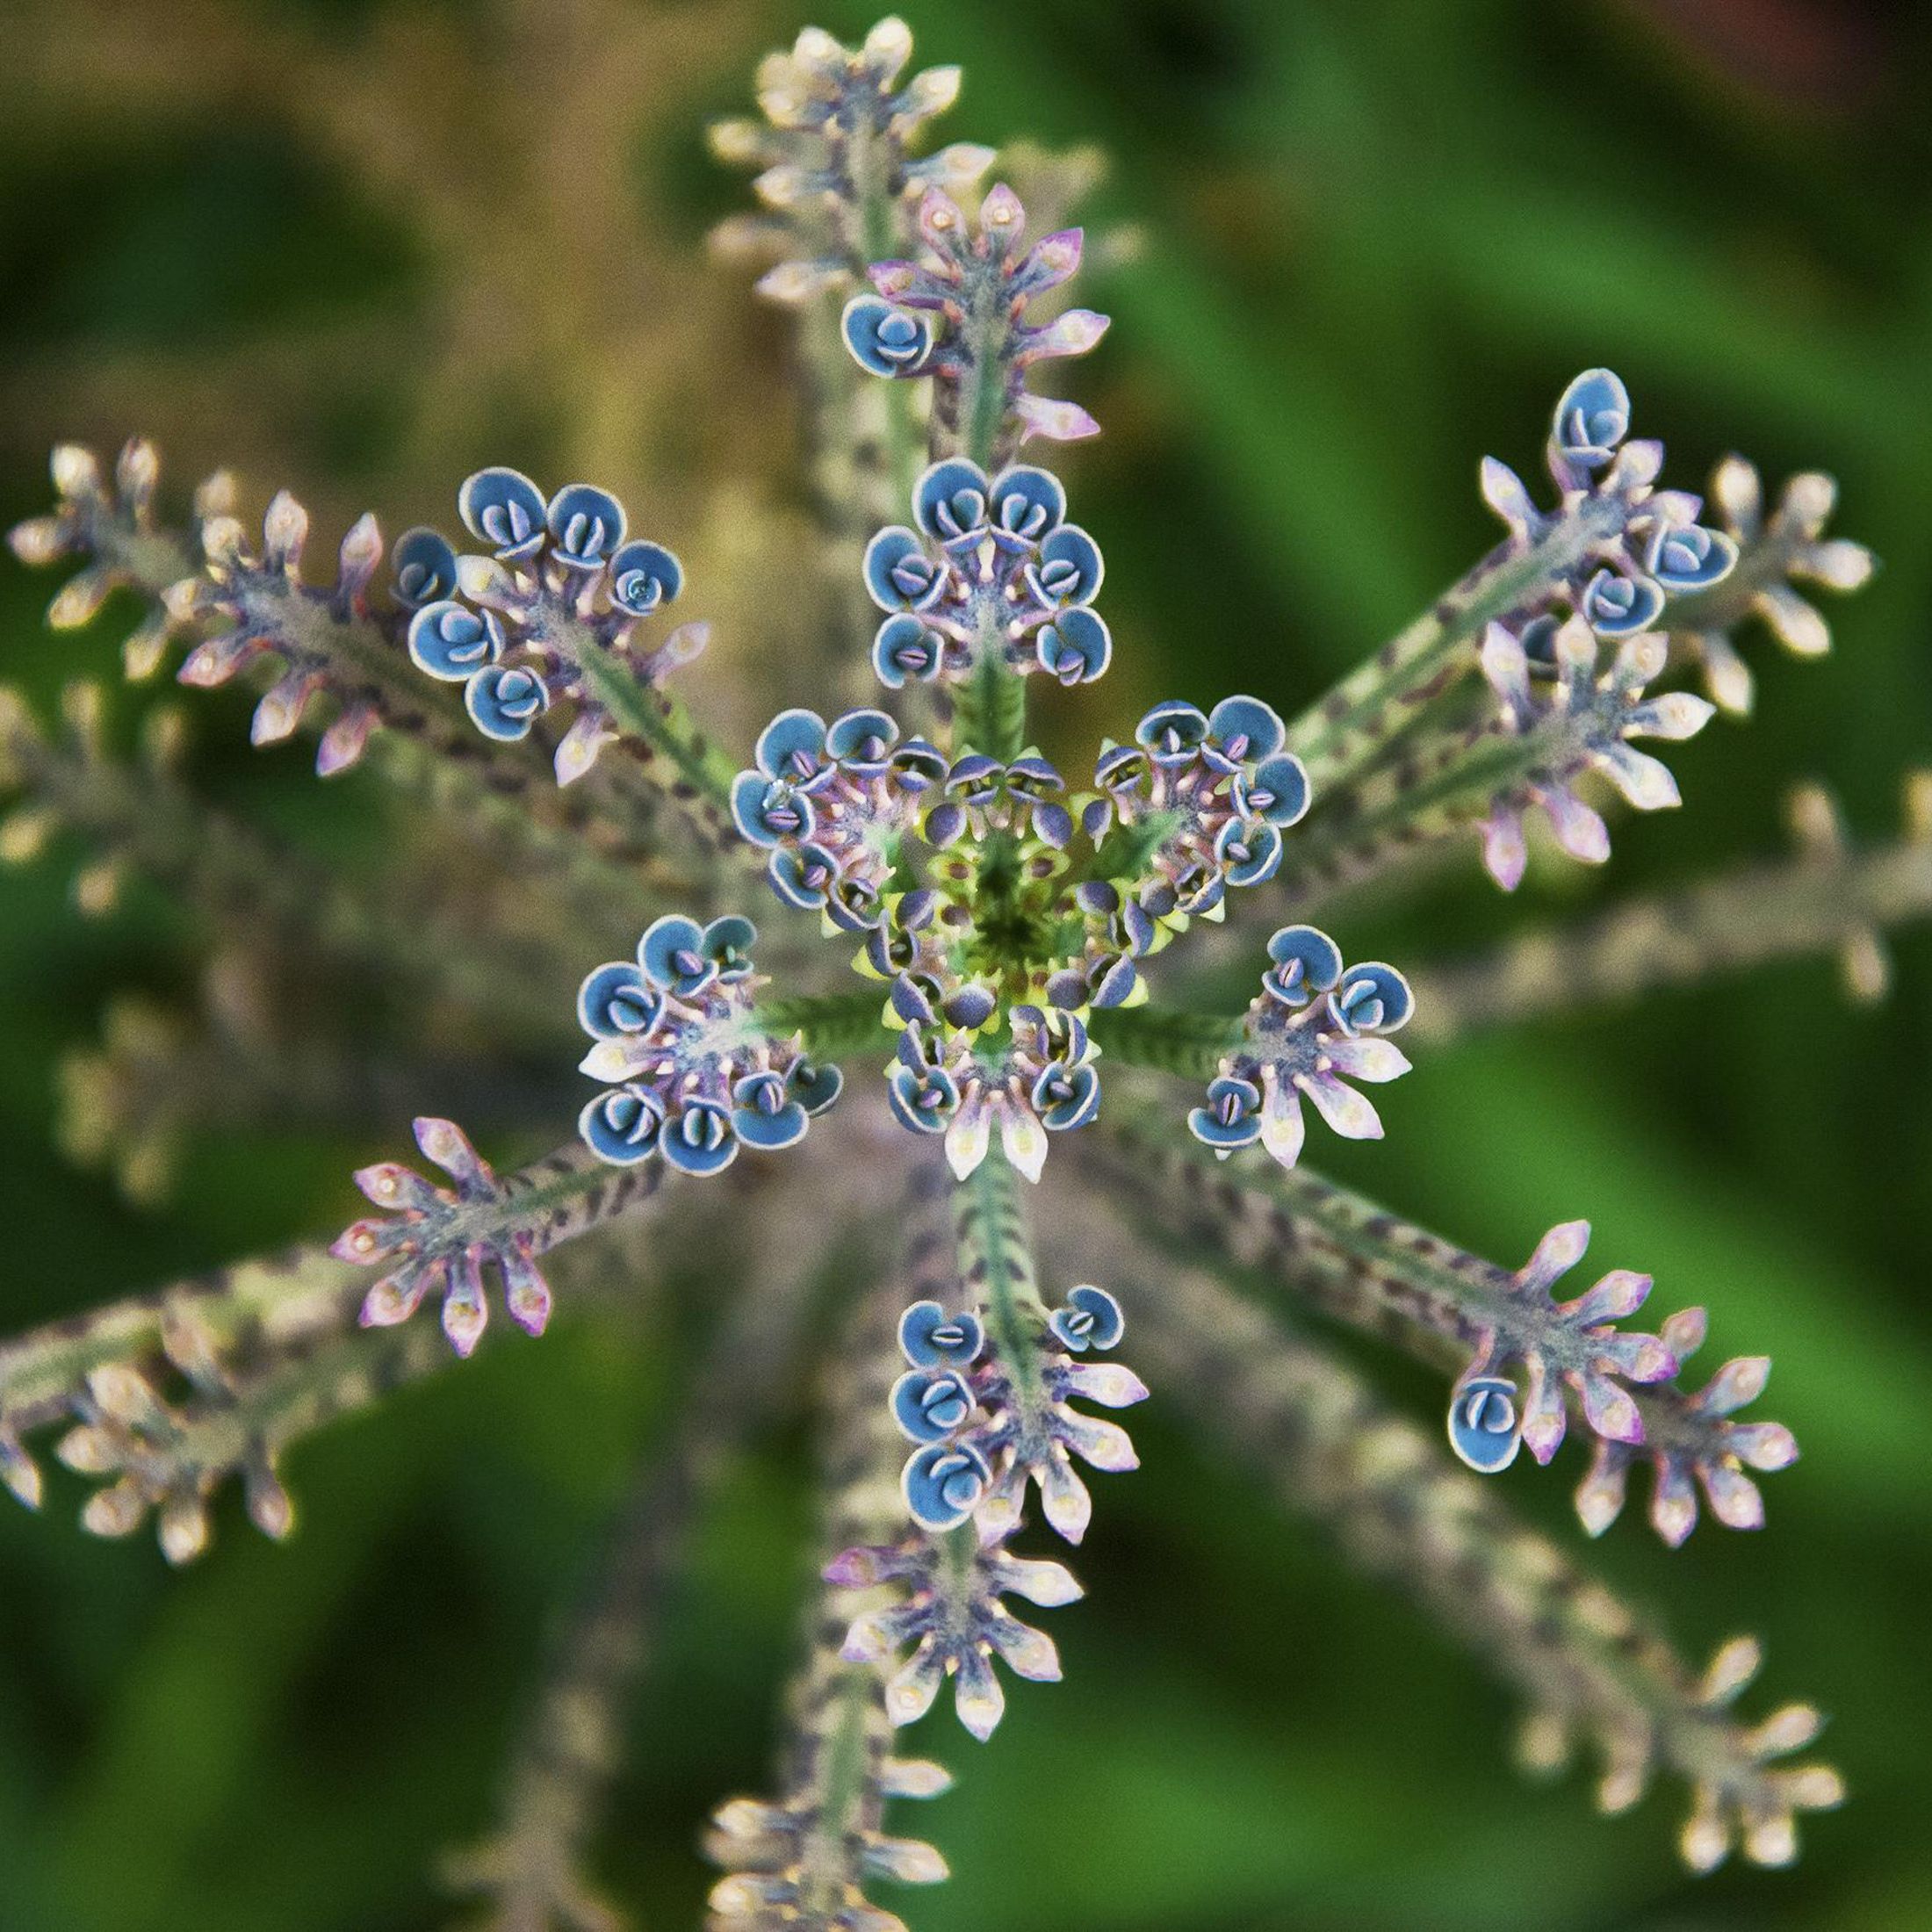 close up image of a flower composed of 6 branching sections covered with tiny blue, pink and white flowers